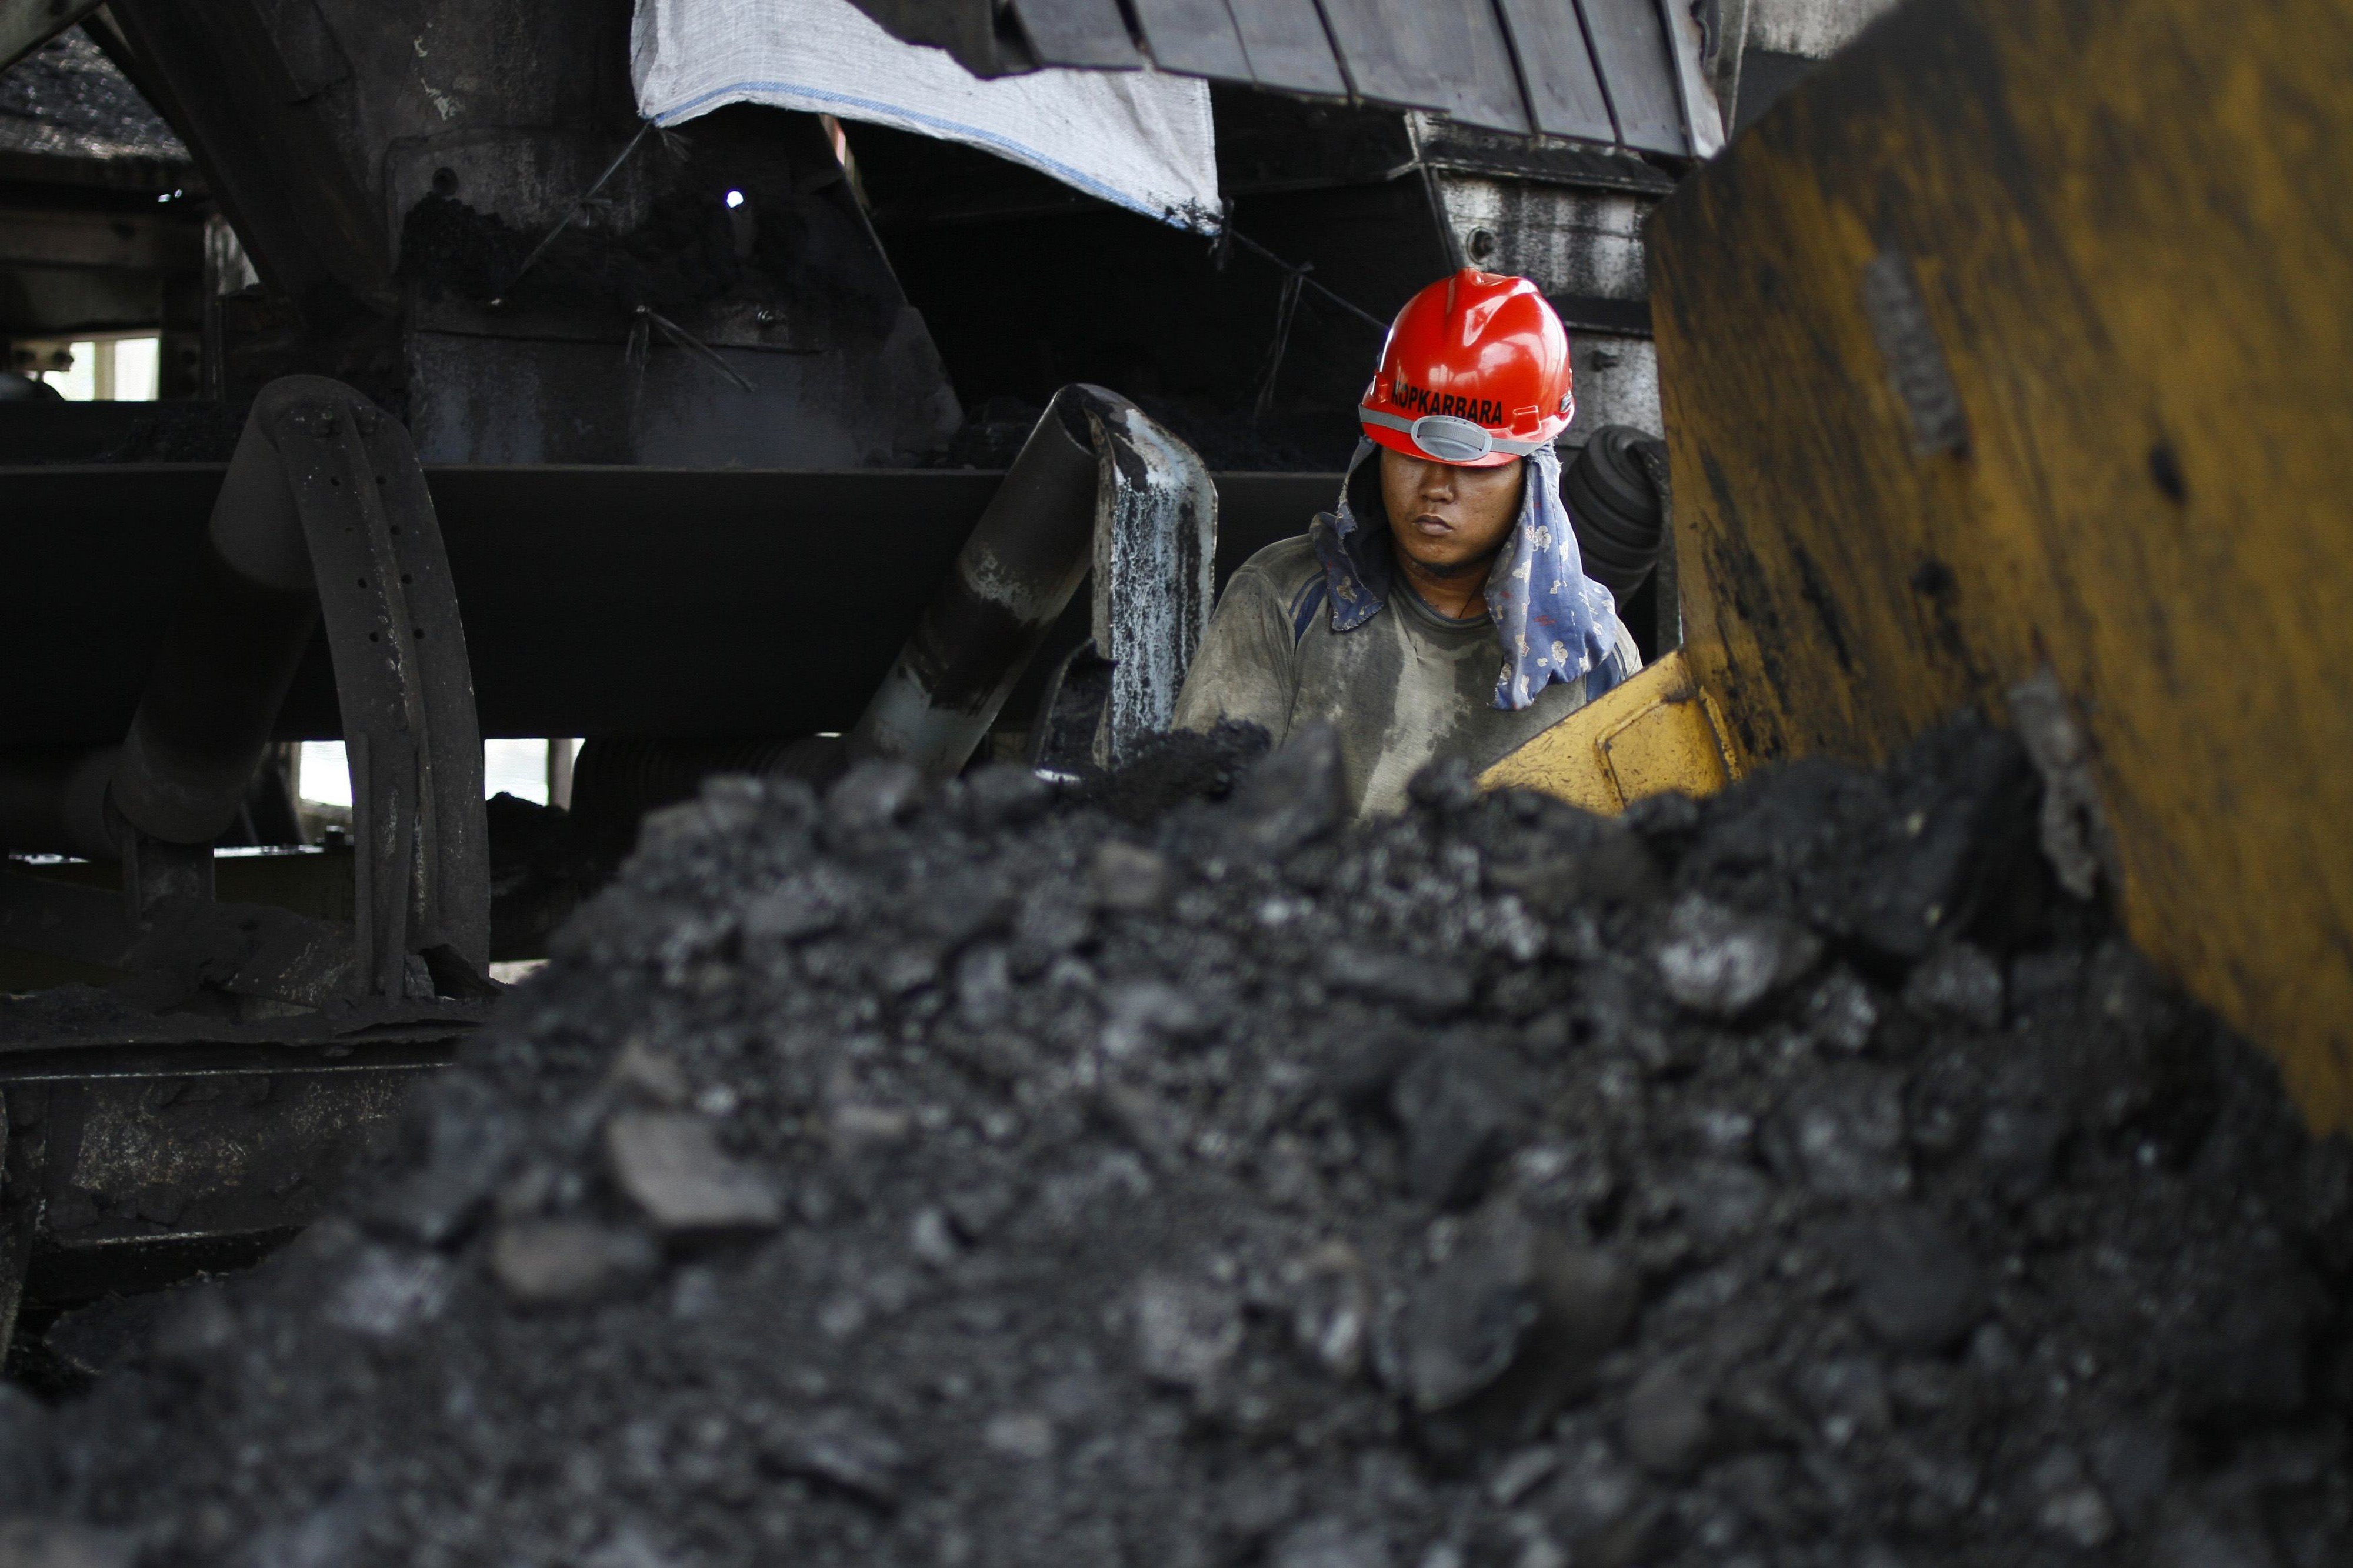 A miner at the Tarahan coal port in Lampung province, Indonesia. The US-China trade war could hit Indonesia’s raw goods exports. Photo: Reuters